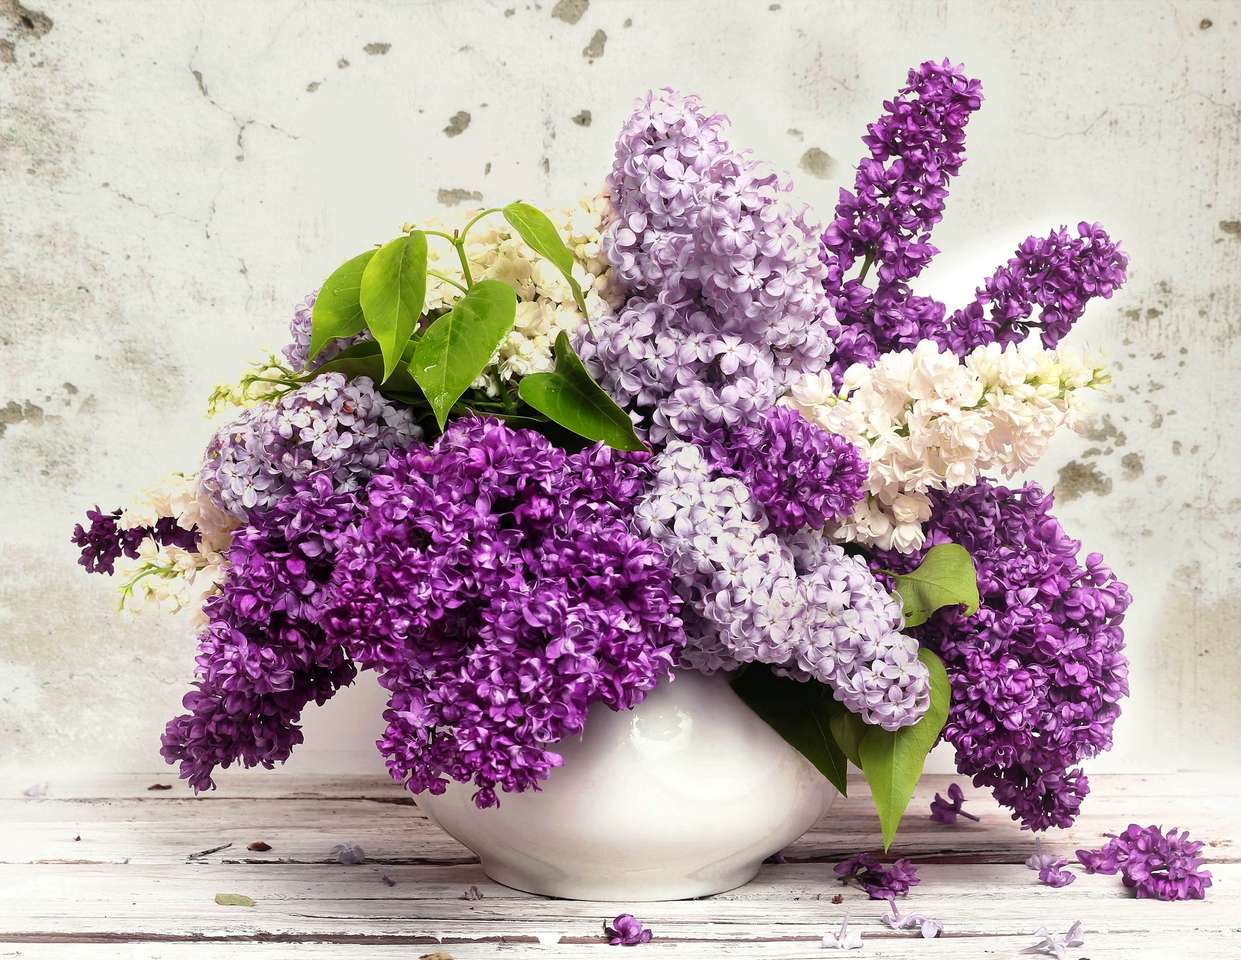 Lilacs in a vase jigsaw puzzle online